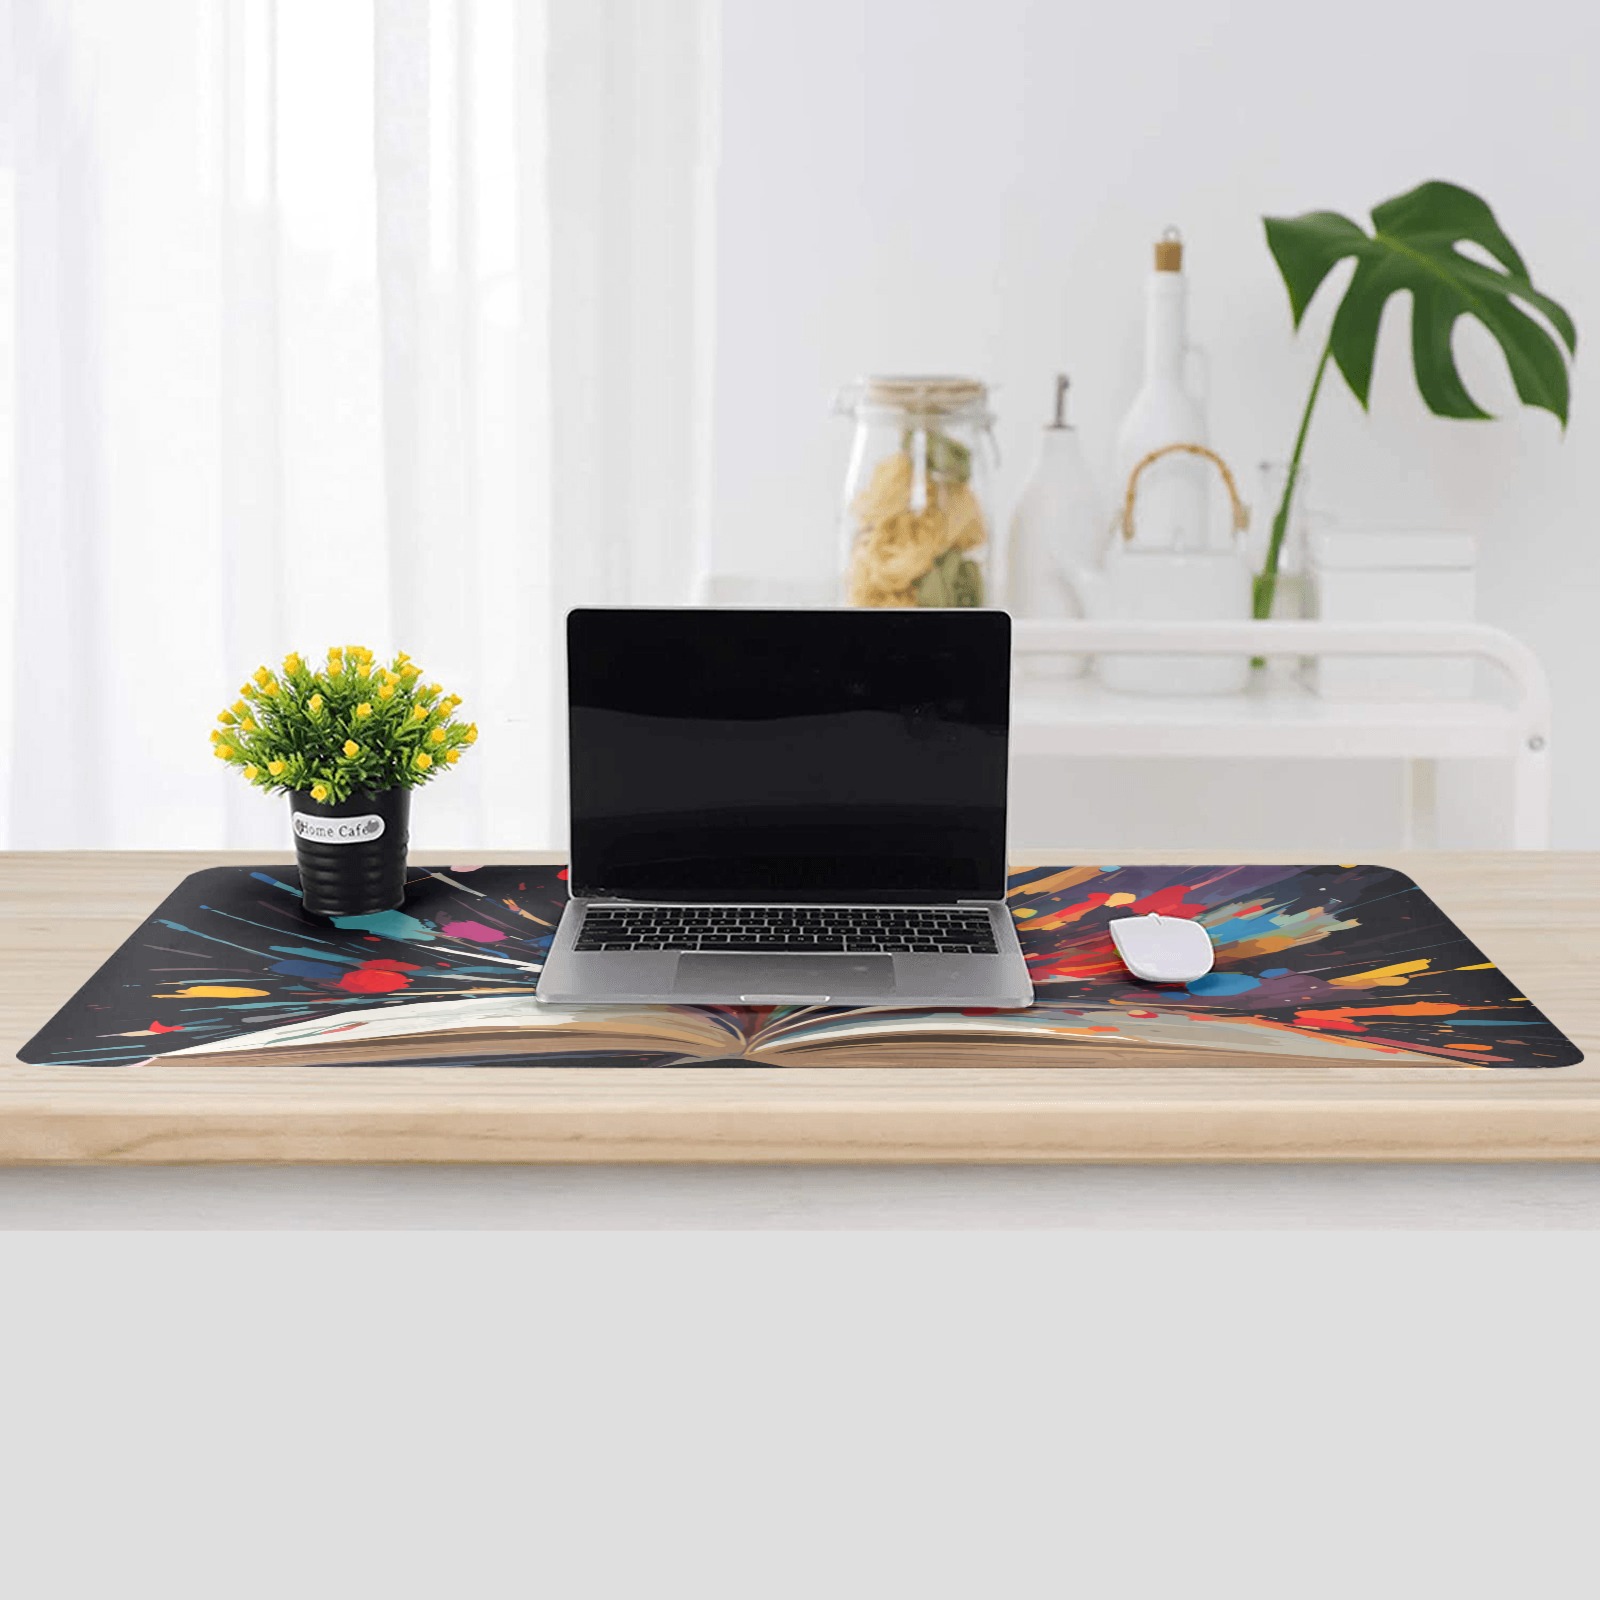 An open book and colorful paint strokes on black Gaming Mousepad (35"x16")